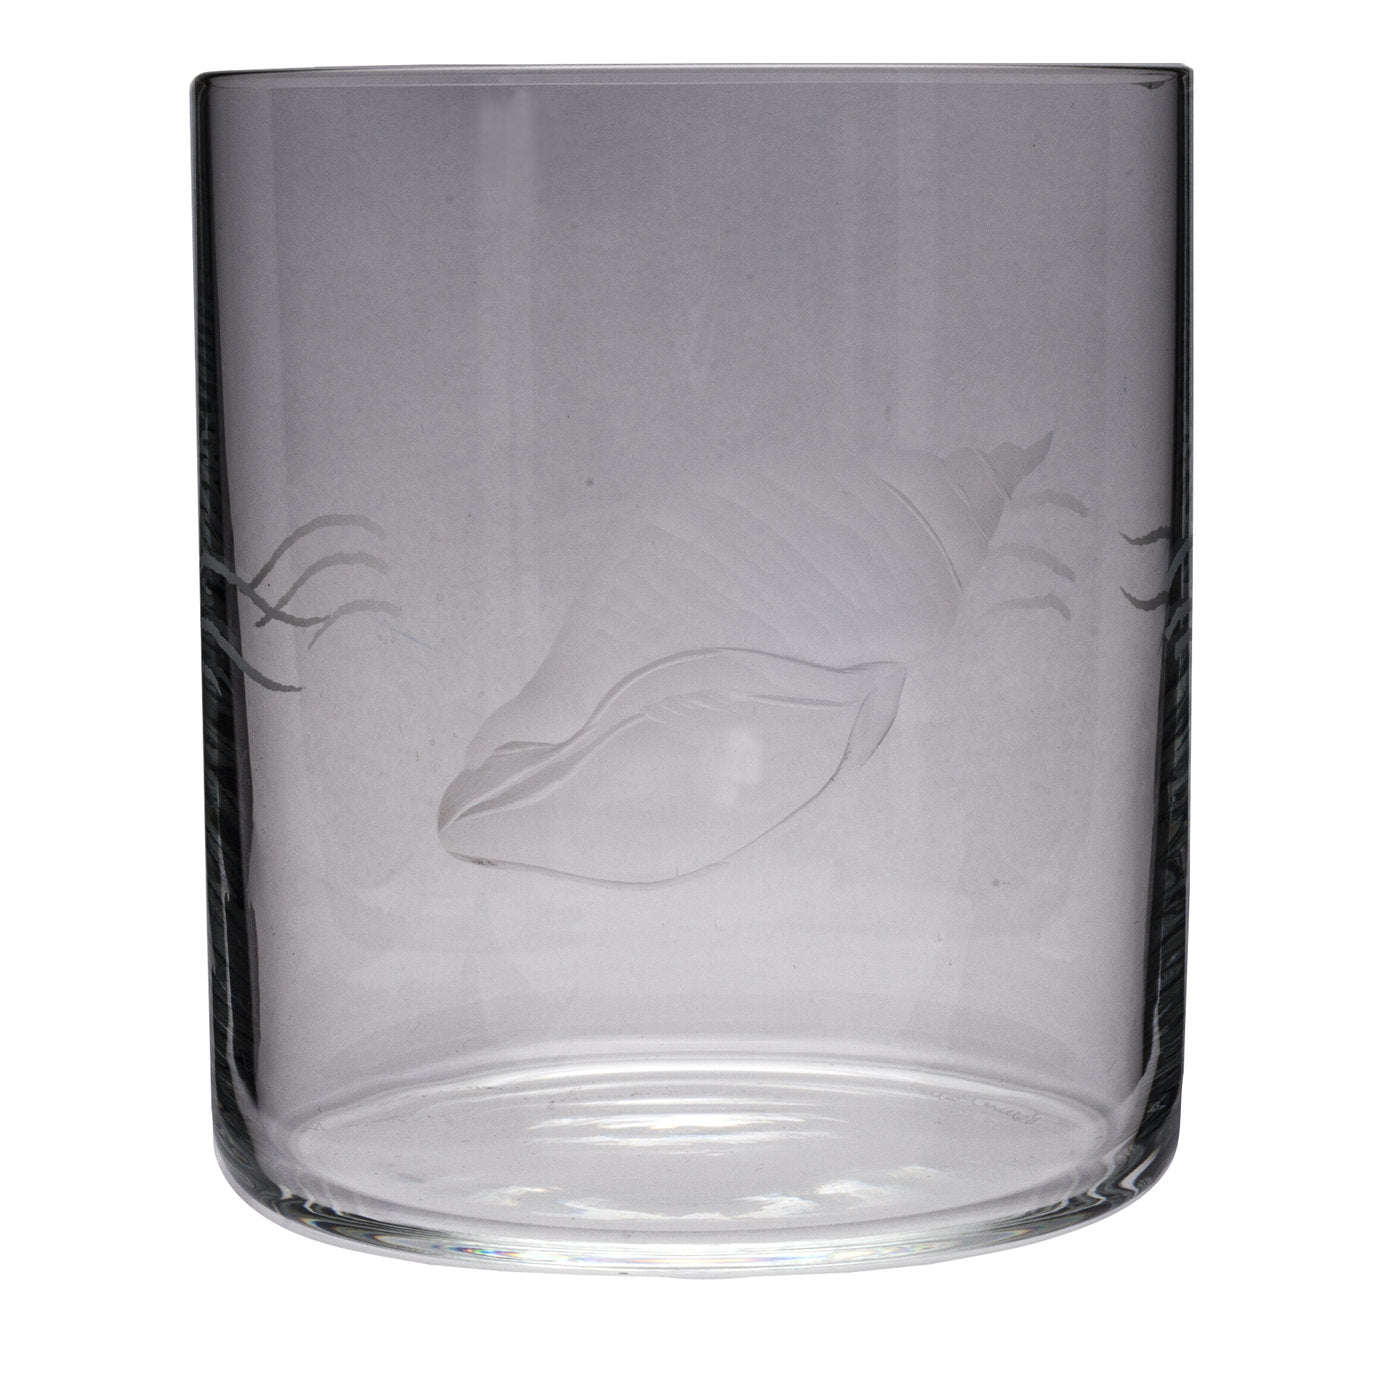 Set of 6 Water Glasses with Marine Theme - Alternative view 3